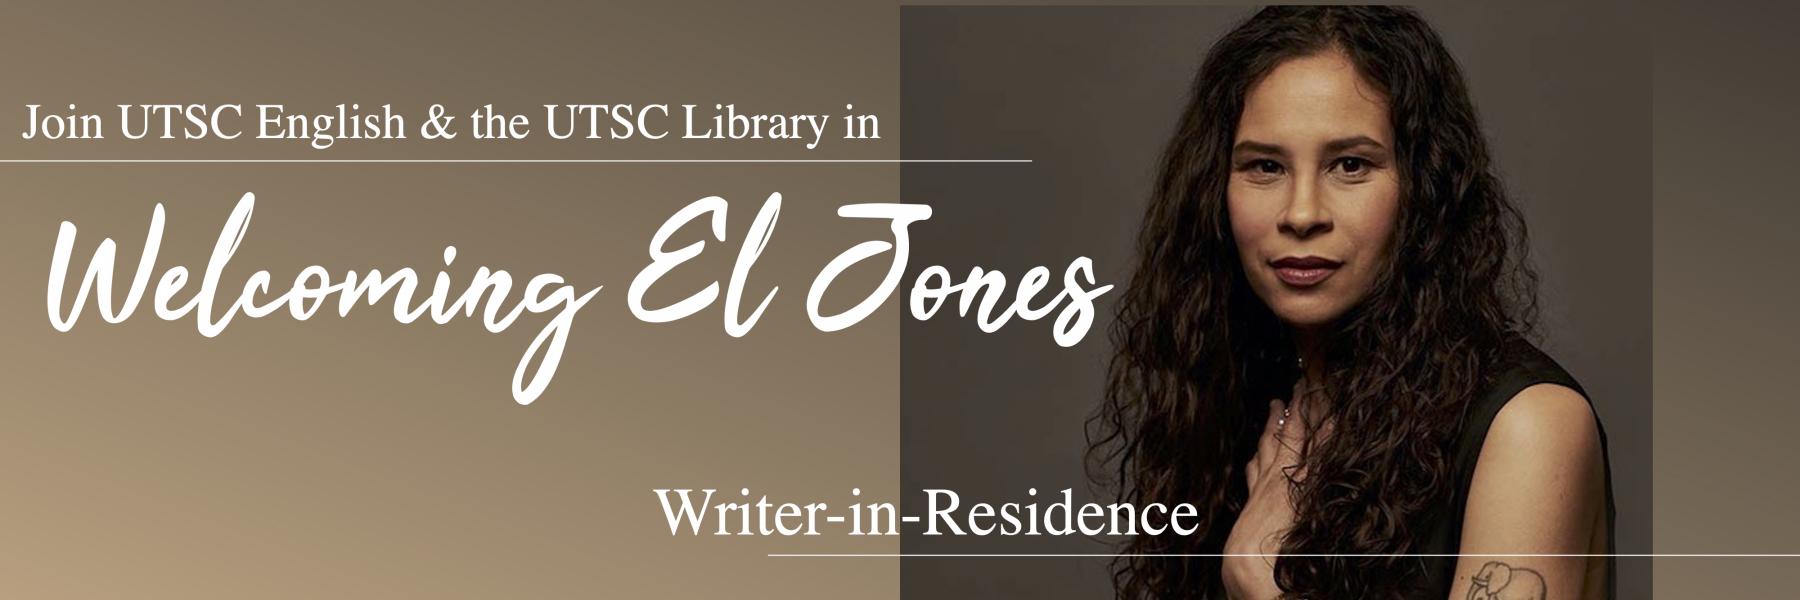 Please join UTSC English & UTSC Library in welcoming El Jones (with author photo)